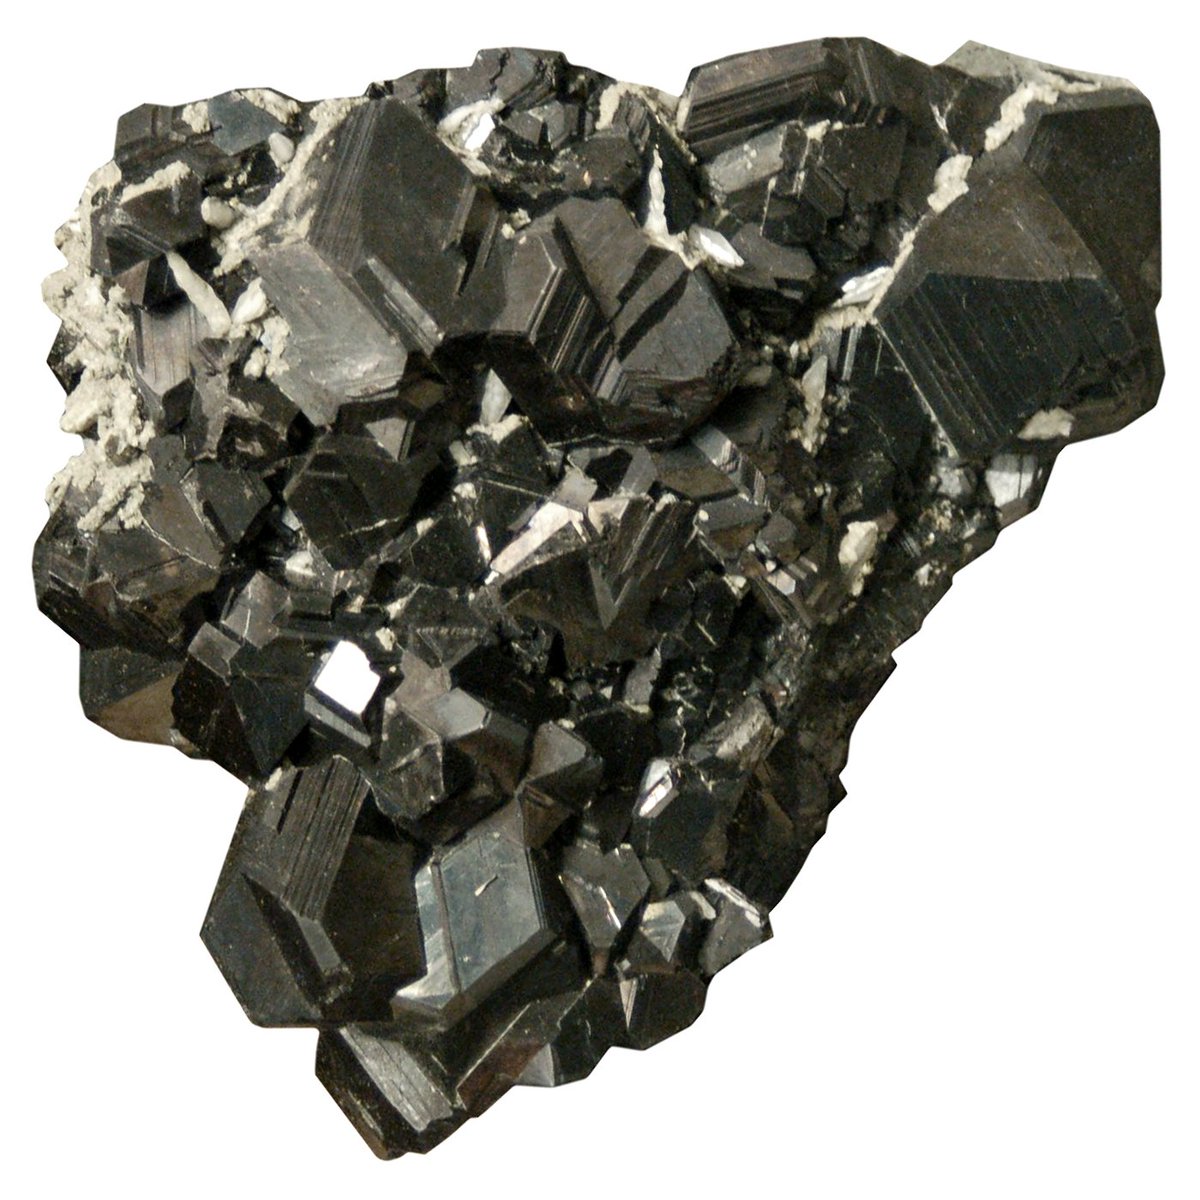 5/ Chalcopyrite (known as fool's gold) and sphalerite are big sources of copper and zinc, respectively. Copper means more wire, and zinc can be used for batteries, just like manganese.